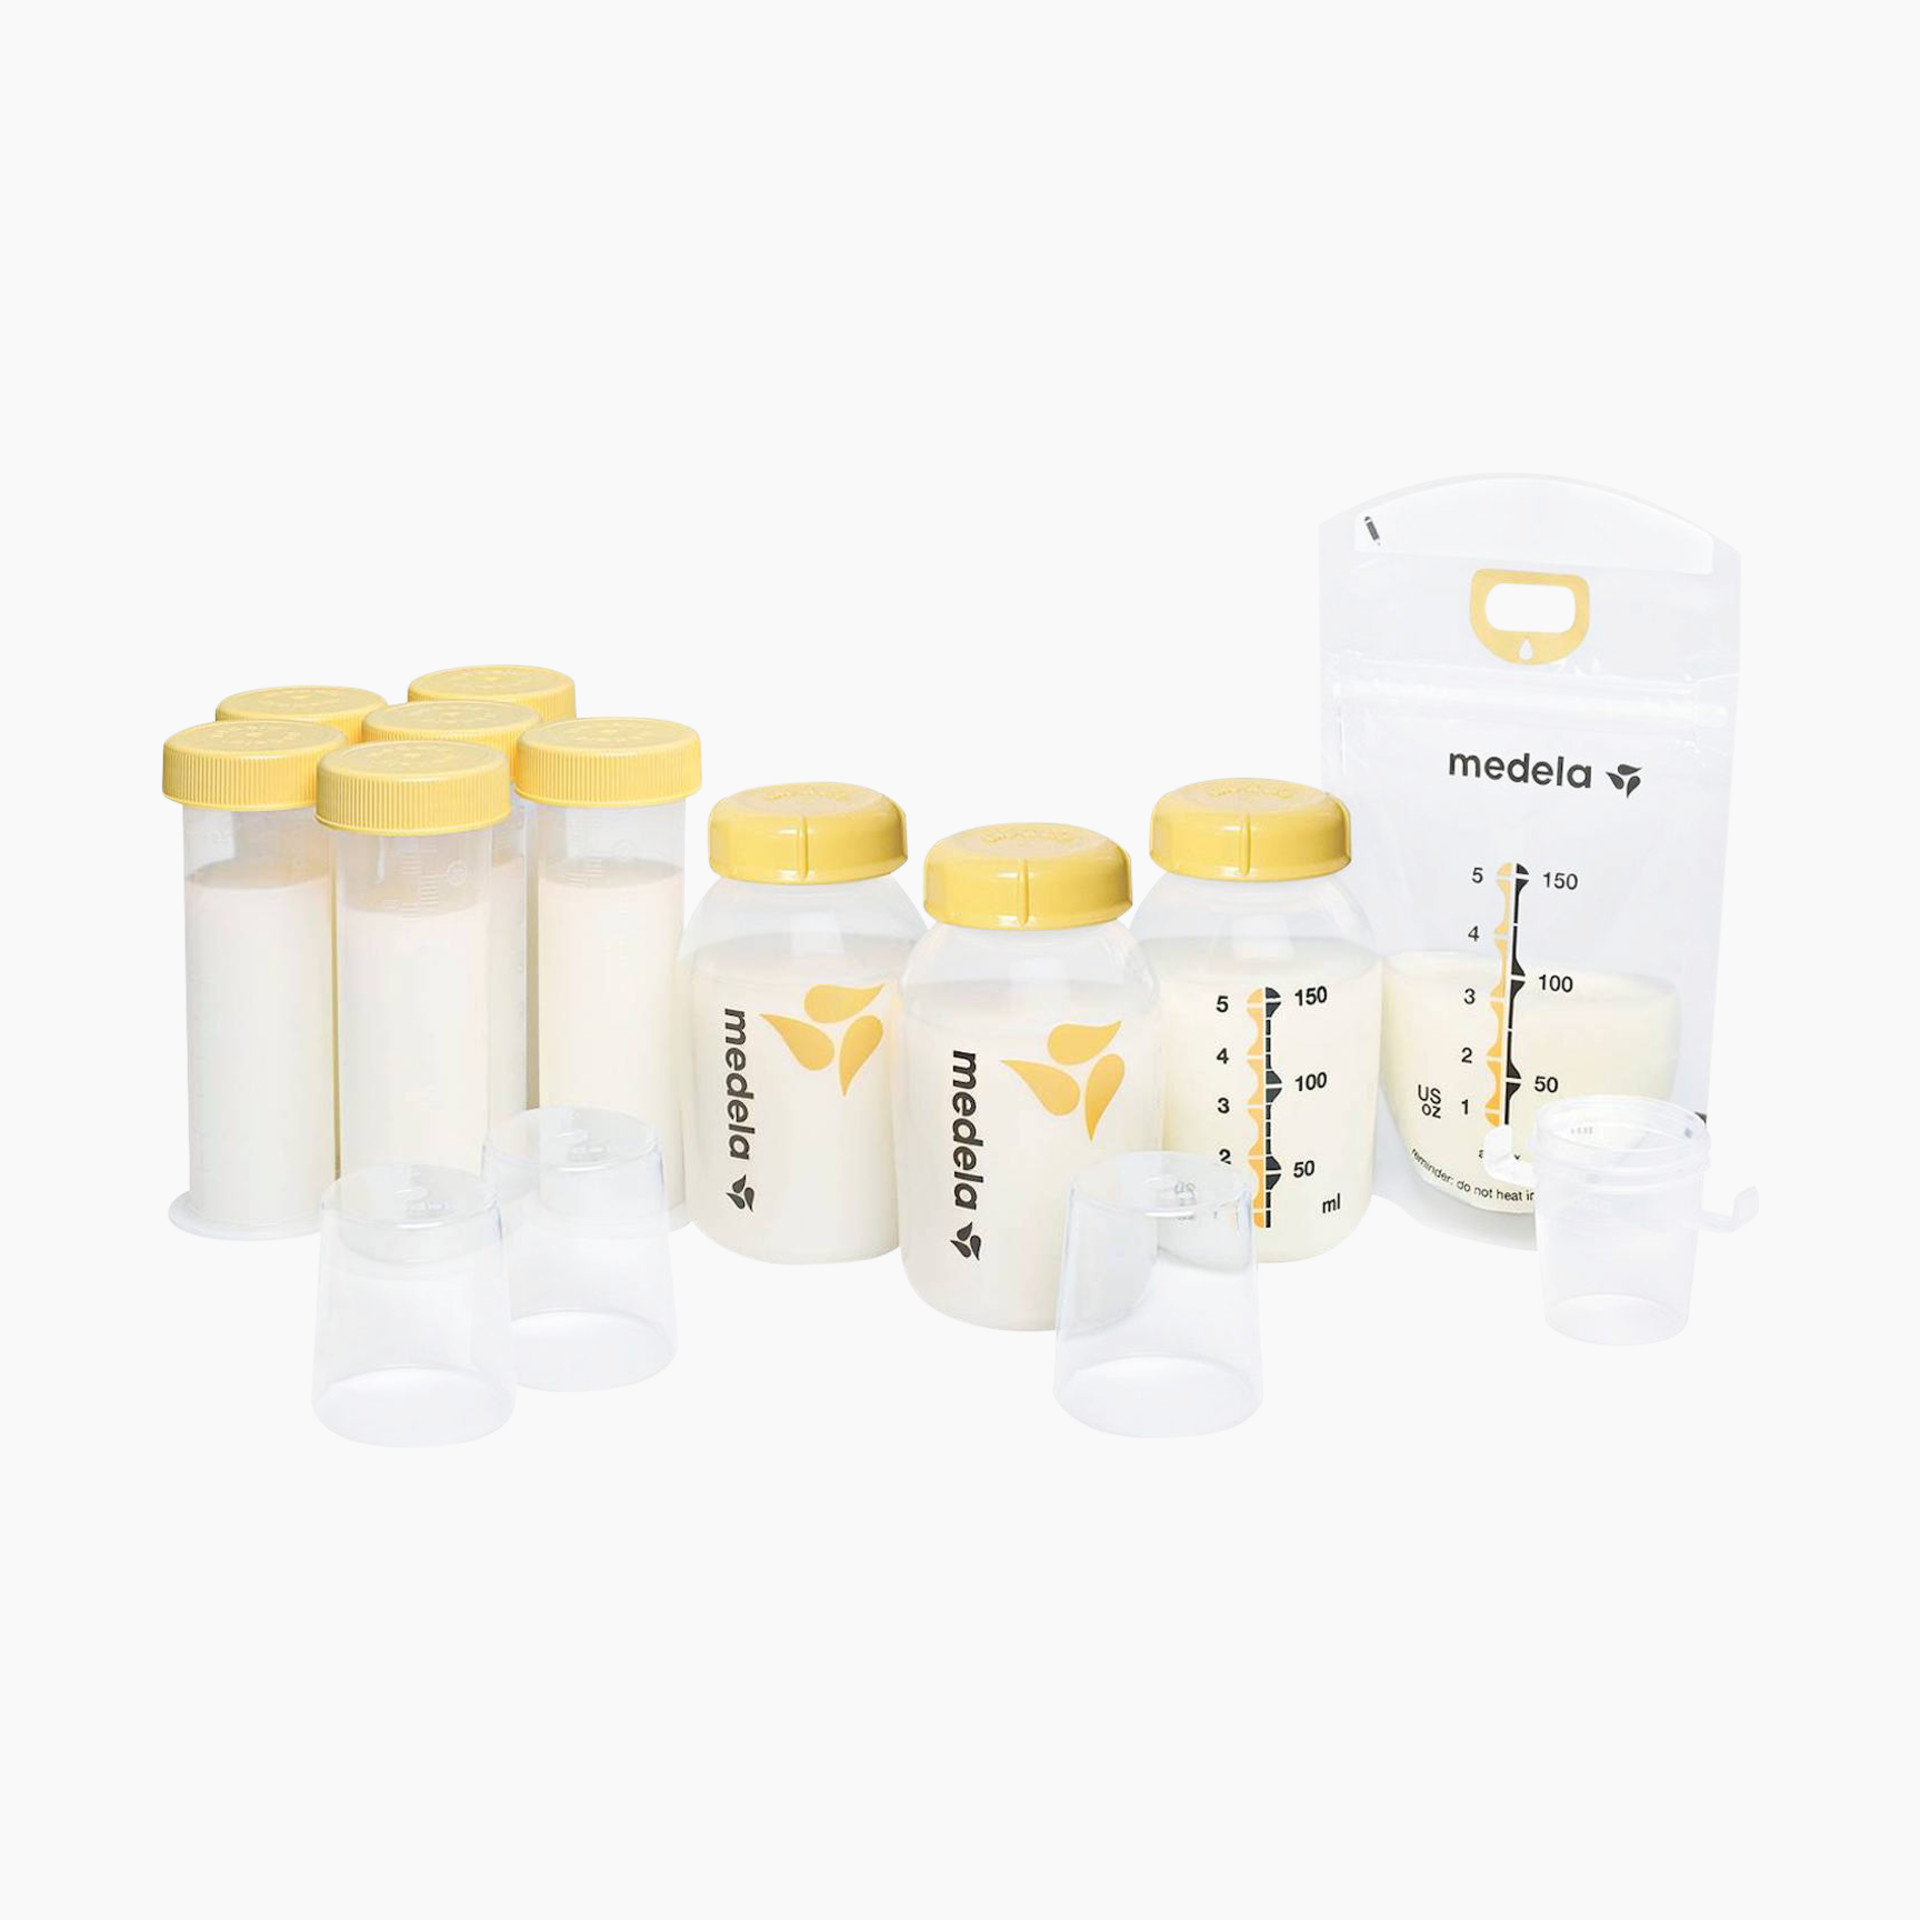 Medela Breast Pump | Pump in Style & Breastfeeding Gift Count, Breast Milk  Storage System & Breast Milk Storage Bags, 100 Count, Ready to Use